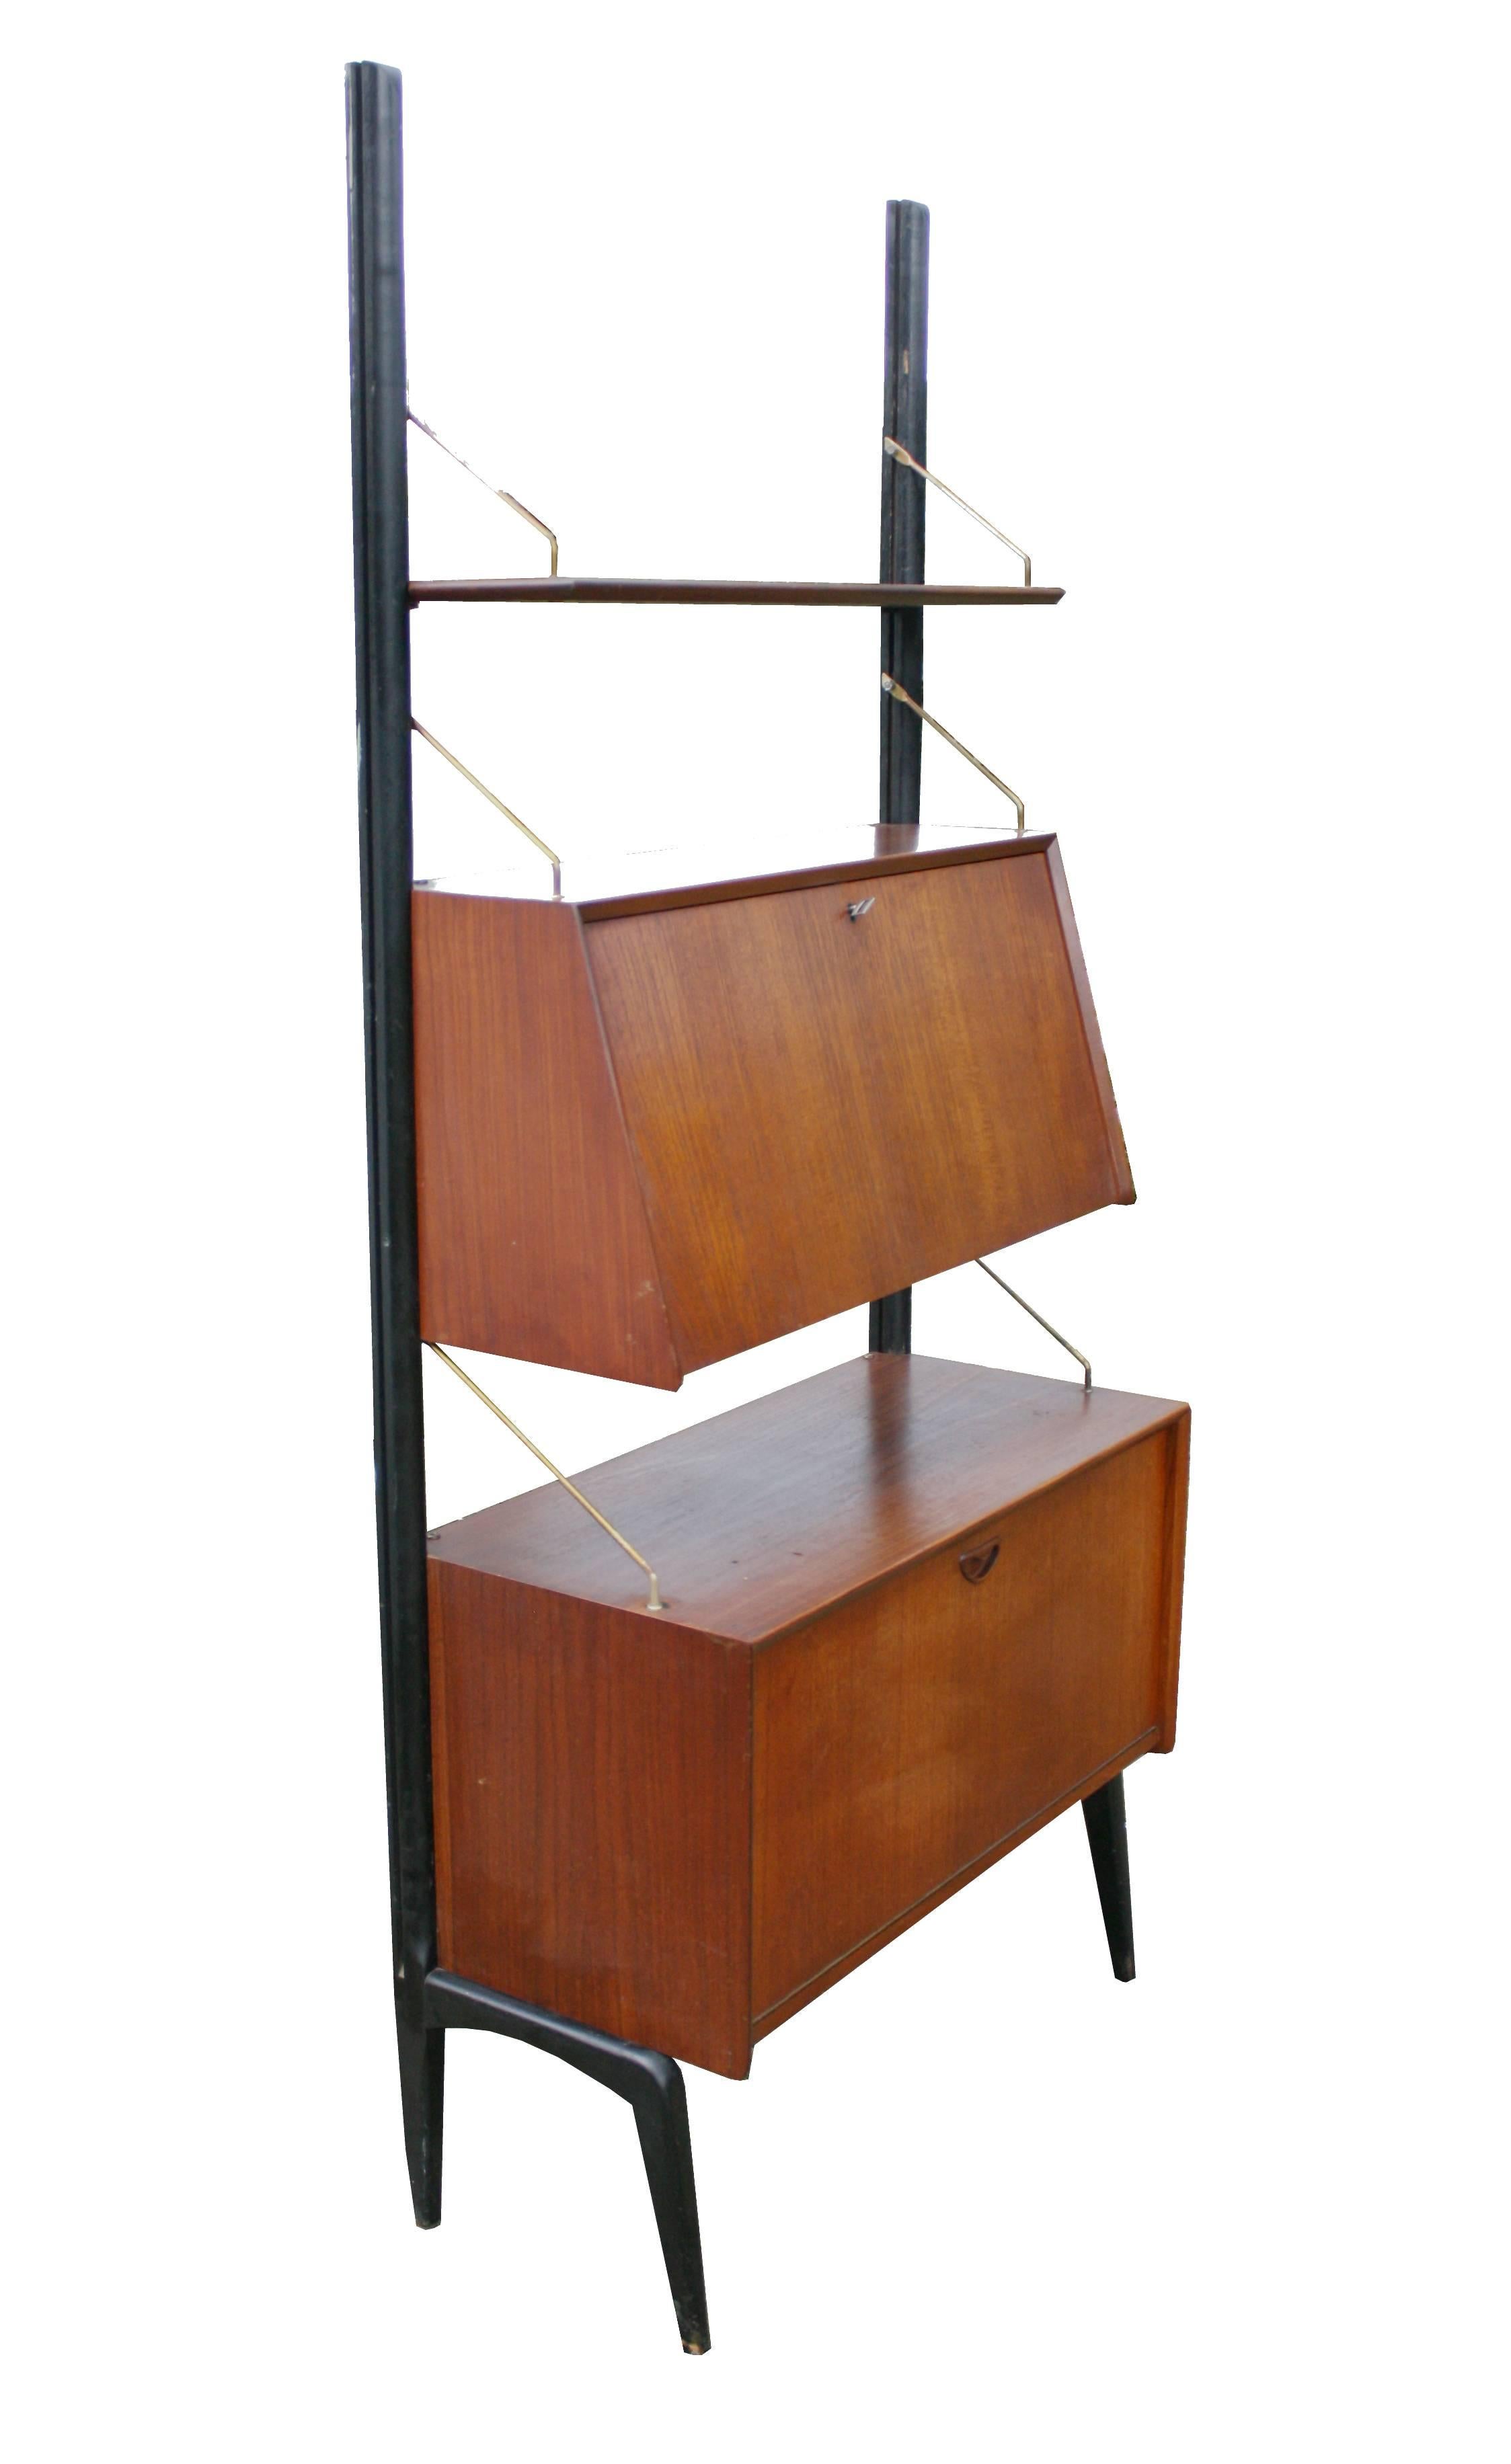 Stylish freestanding modular wall unit by Louis Van Teeffelen for Webe, 1958.

This freestanding modular wall unit was designed by Louis van Teeffelen for Wébé in the 1950s. This unit features an adjustable teak shelve and a secretary and liquor